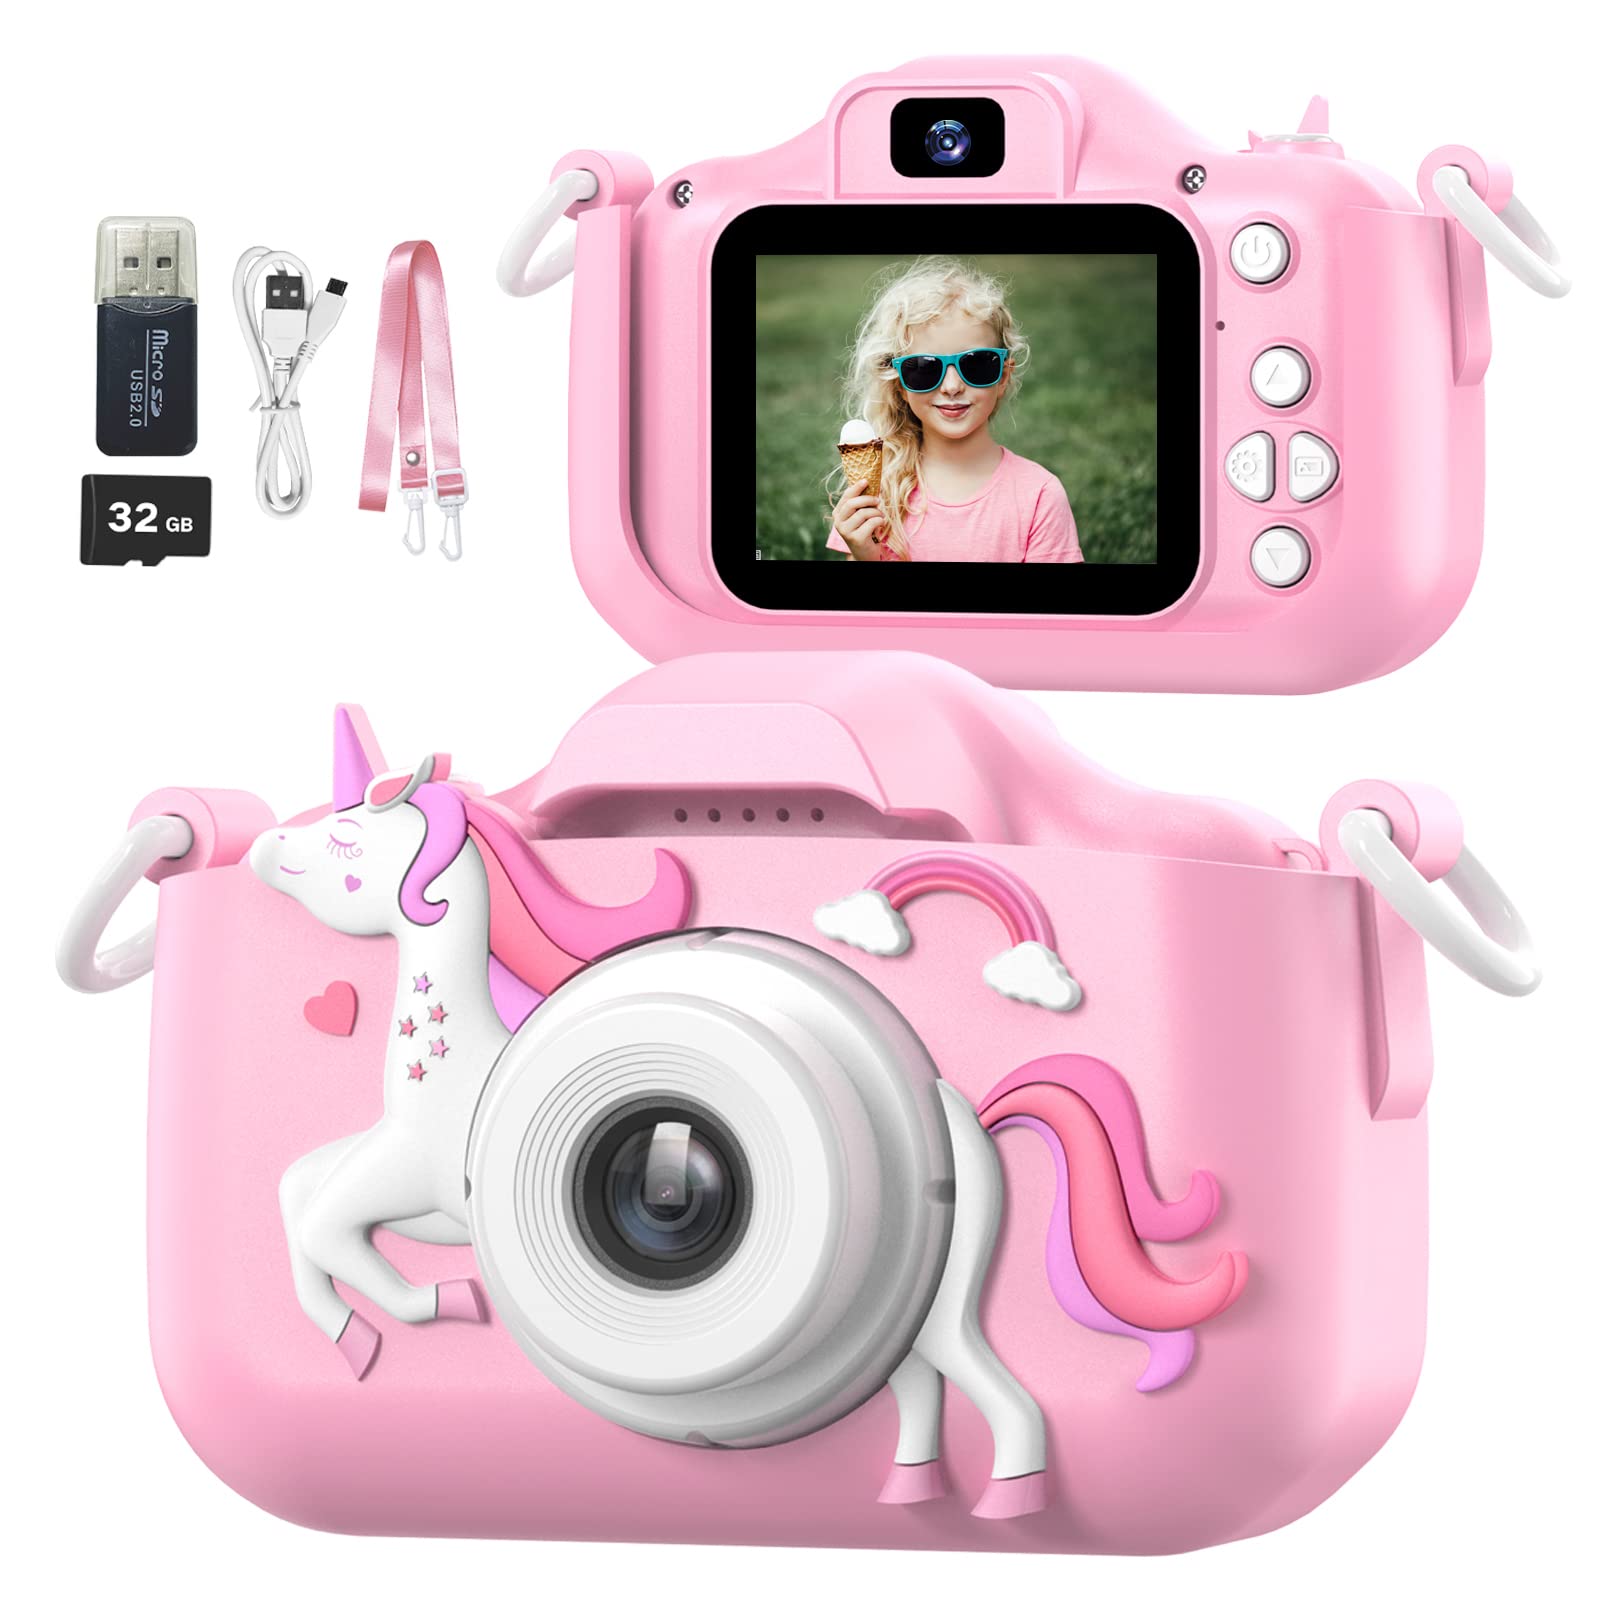 Mgaolo Children's Camera Toys for 3-12 Years Old Kids Boys Girls,HD Digital Video Camera with Protective Silicone Cover,Christmas Birthday Gifts with 32GB SD Card (Pink)